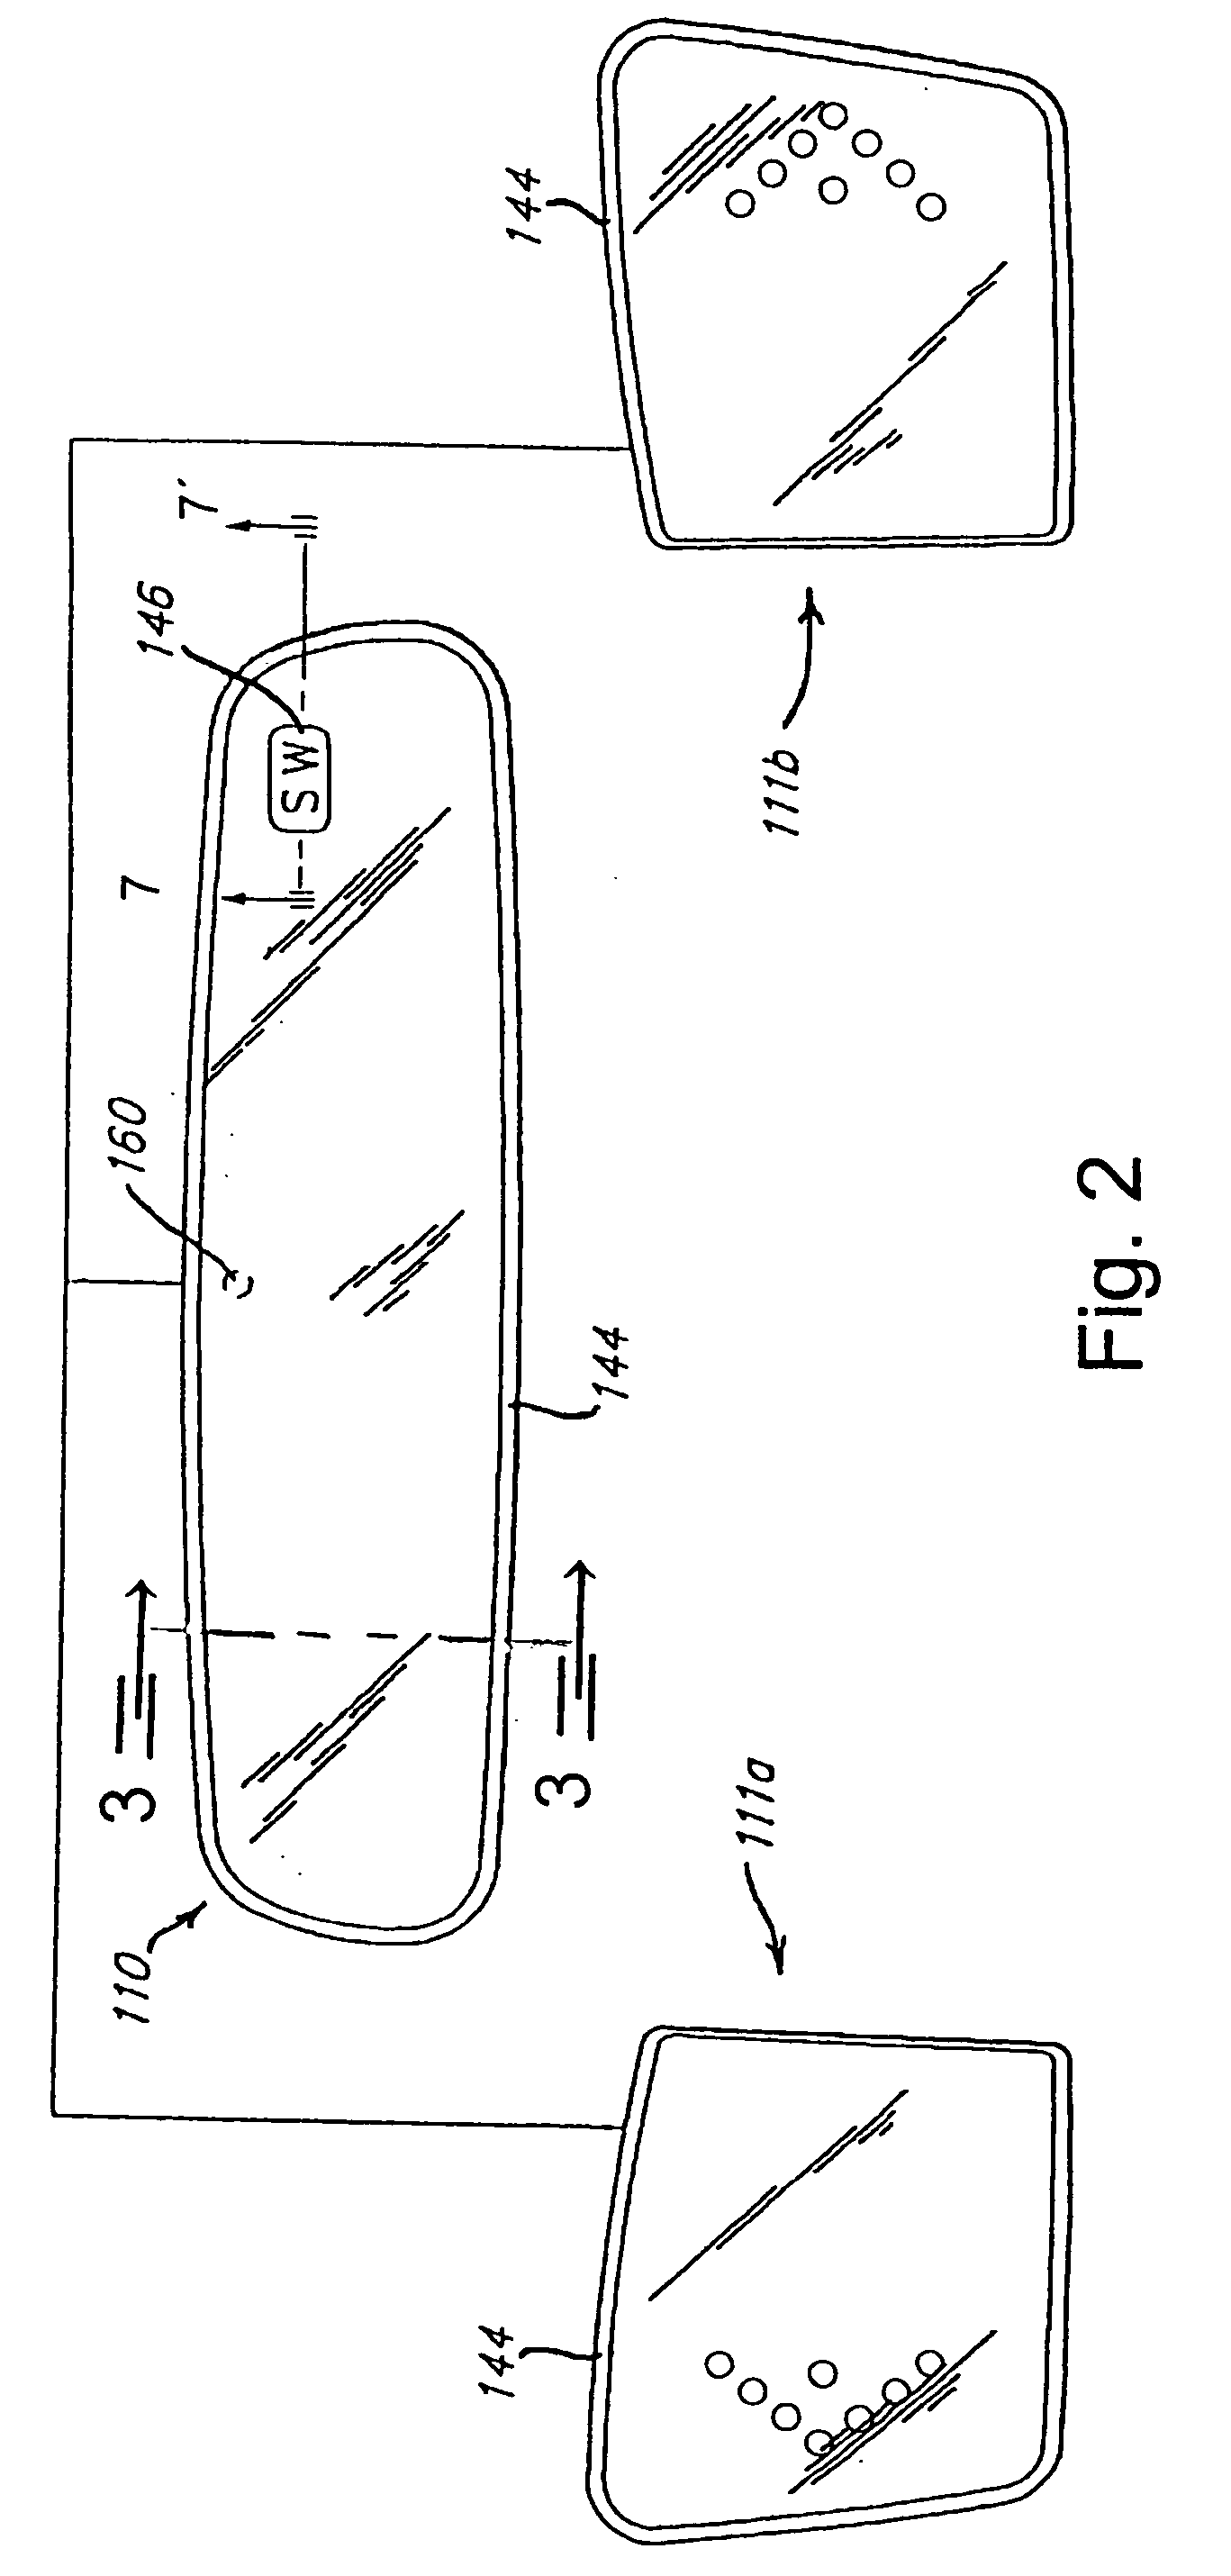 Electrochromic rearview mirror incorporating a third surface partially transmissive reflector